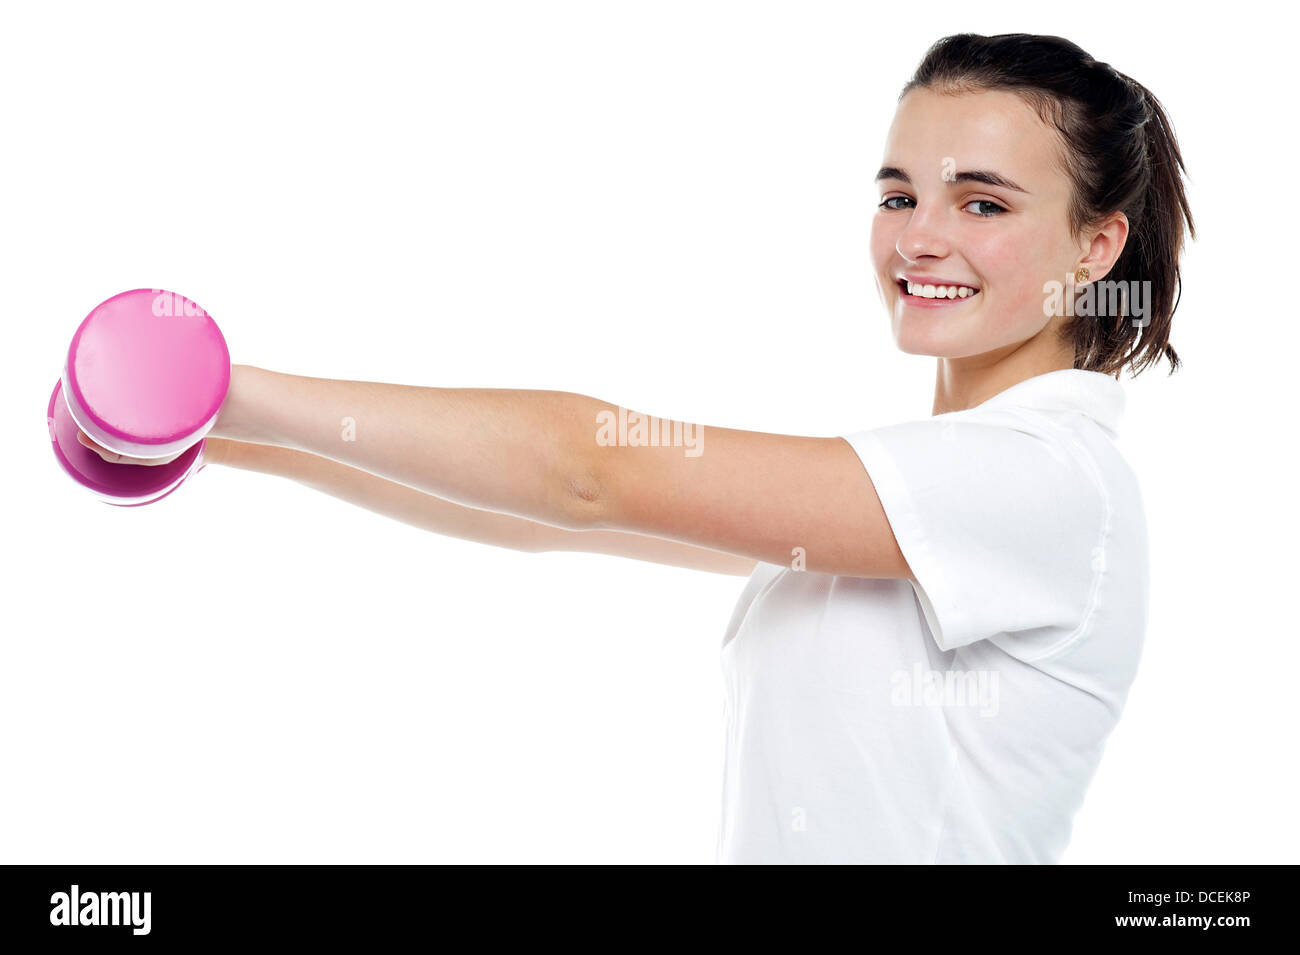 Side profile of an energetic girl with dumbbells in her outstretched arms Stock Photo